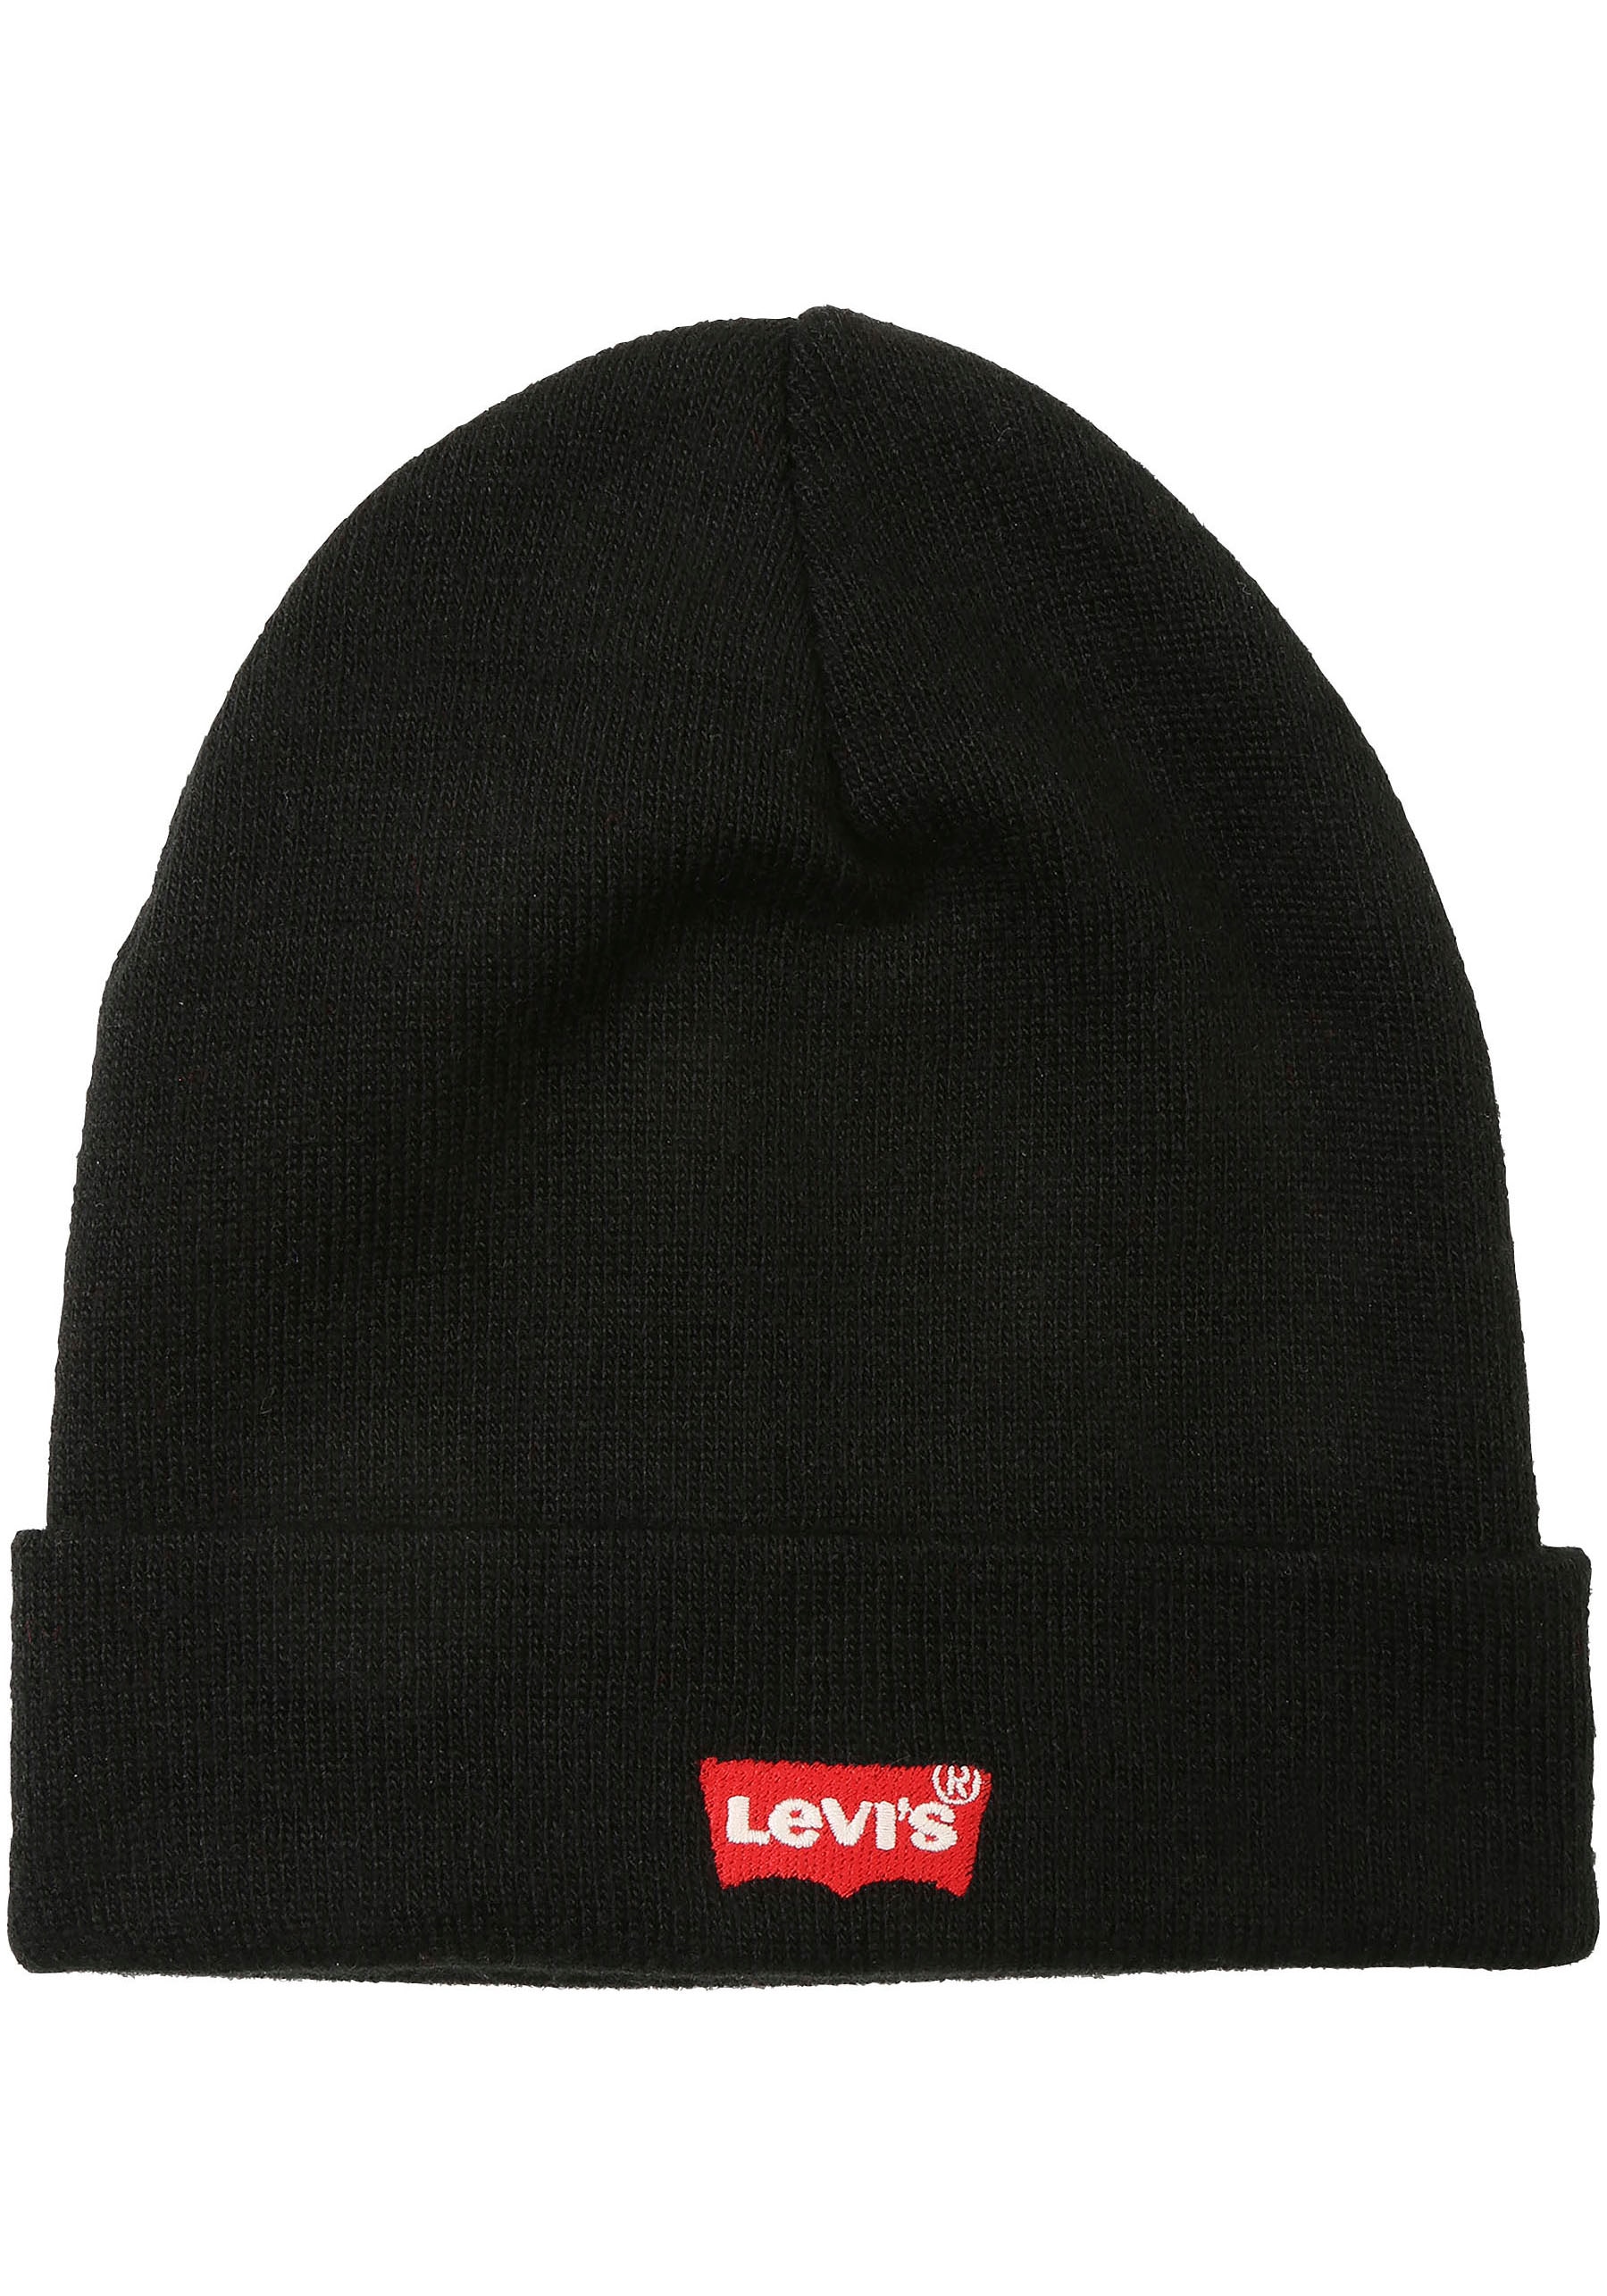 Levis Beanie "Beanie Red Betwing", (1 St.)